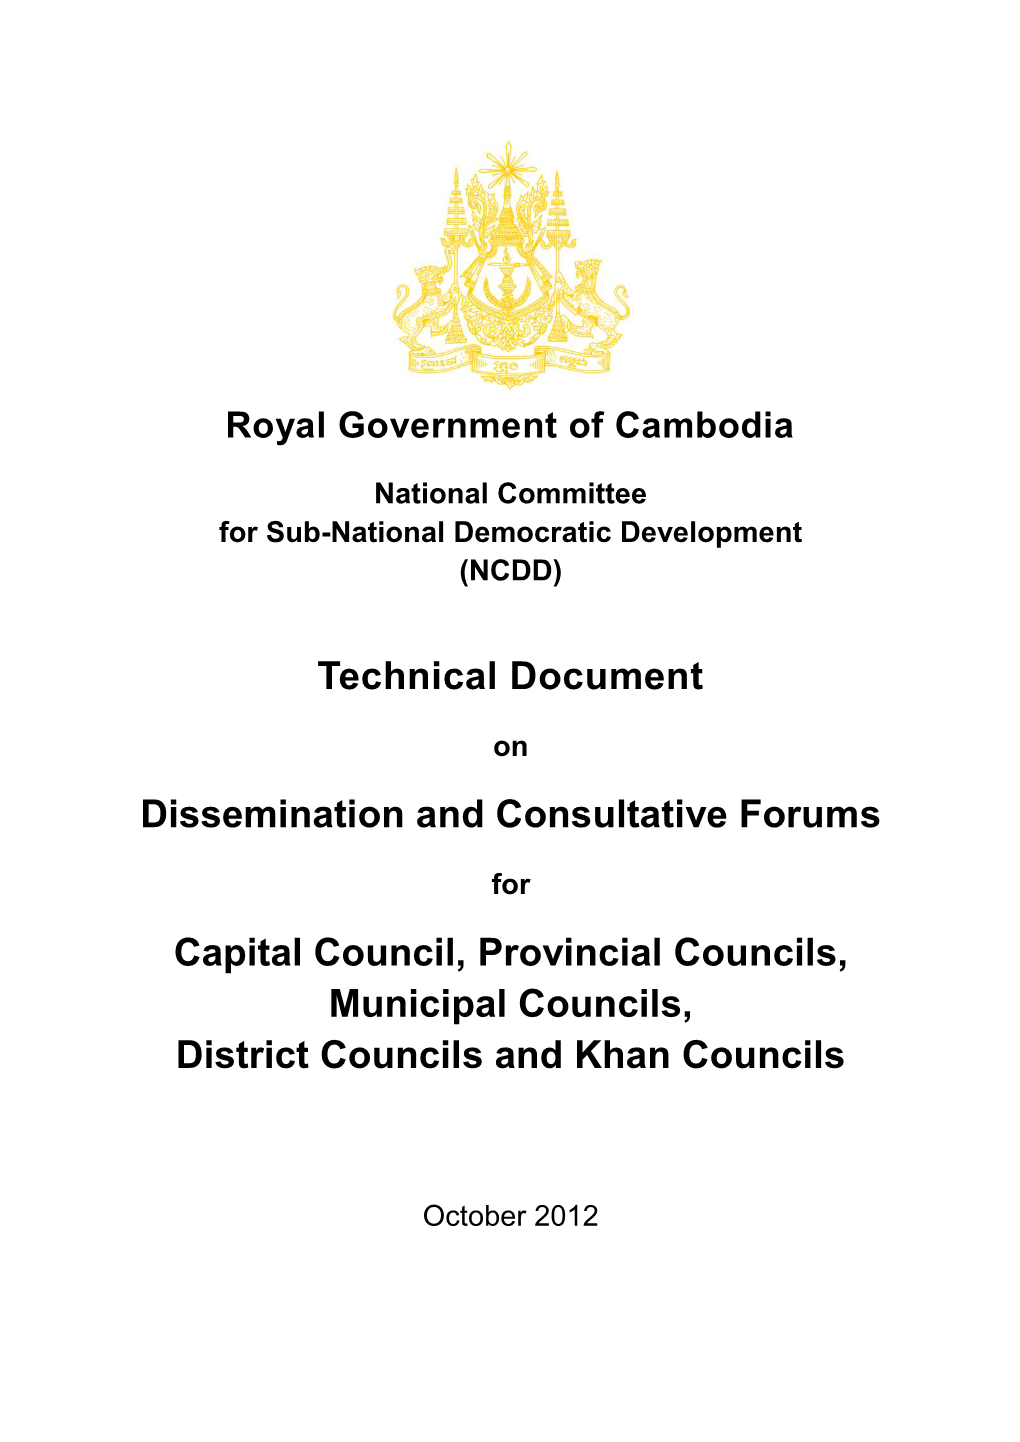 Technical Document on Dissemination and Consultative Forums for the Capital Council, Provincial Councils, Municipal Councils, District Councils and Khan